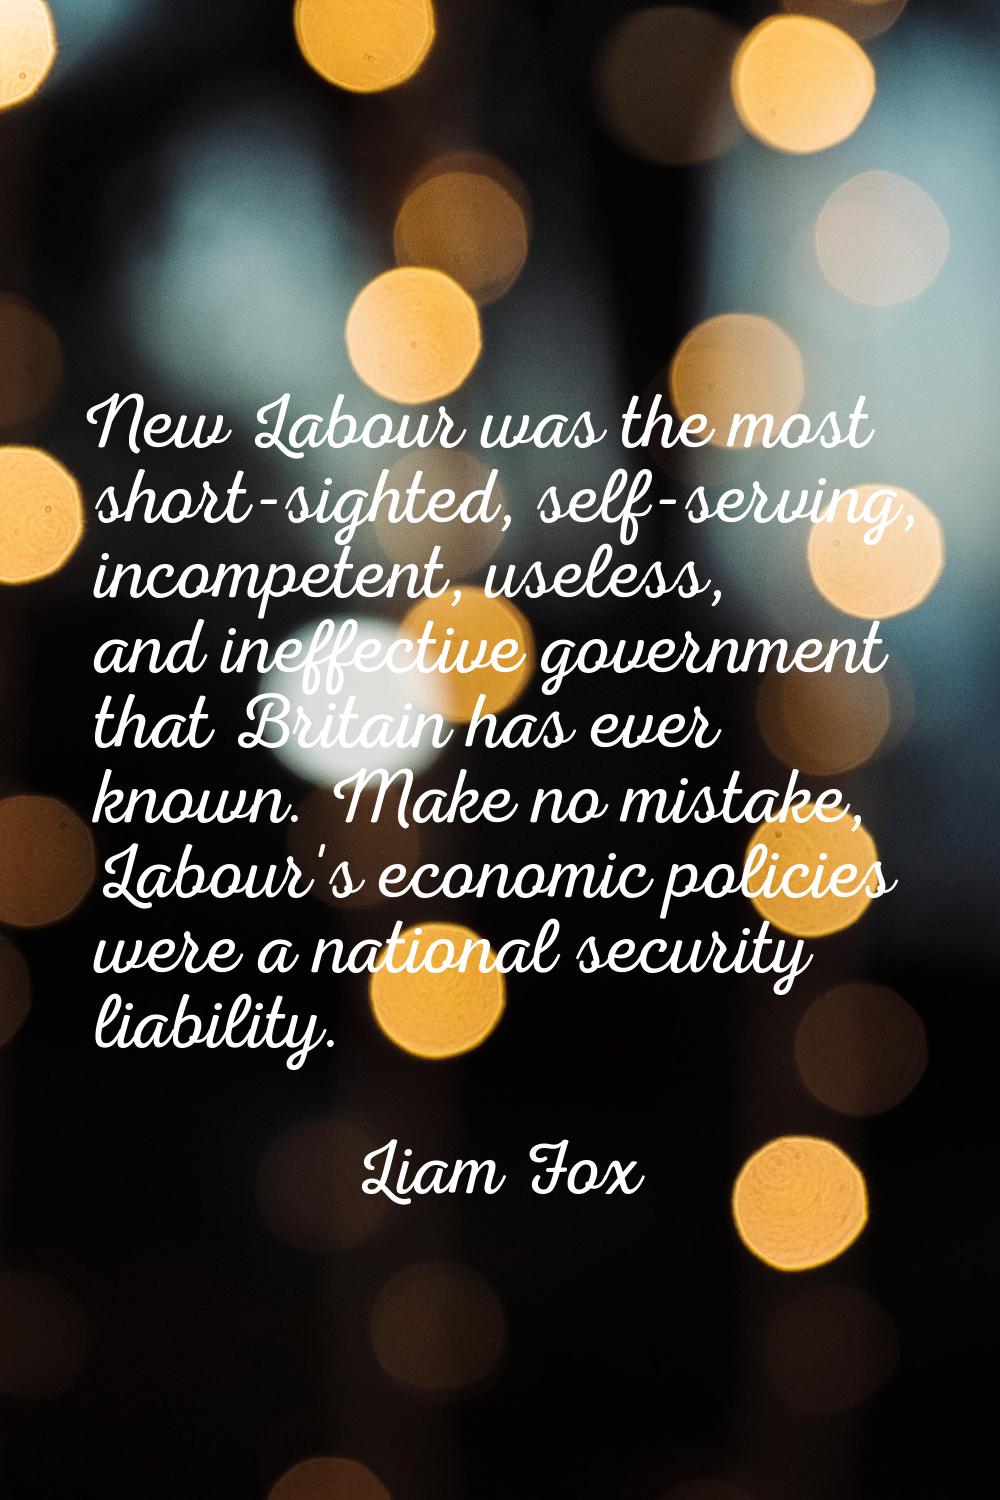 New Labour was the most short-sighted, self-serving, incompetent, useless, and ineffective governme